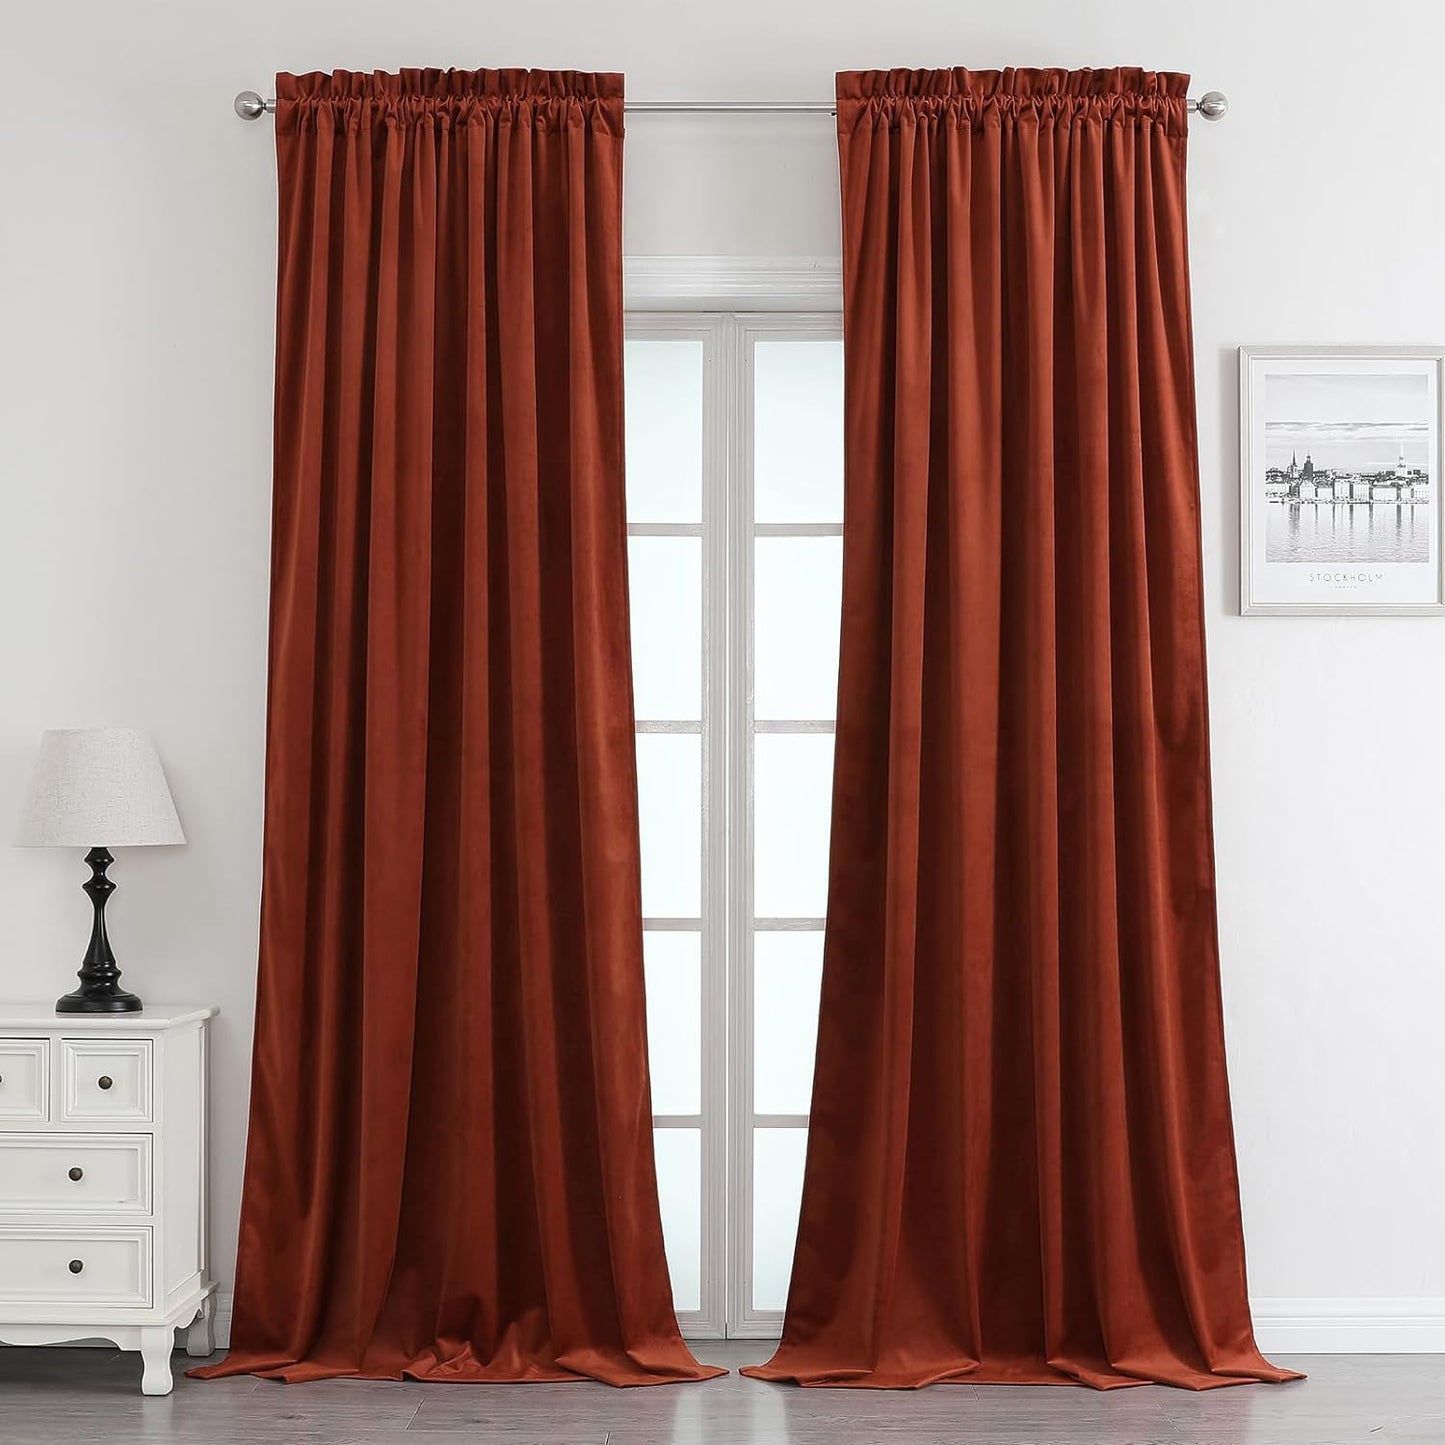 Benedeco Green Velvet Curtains for Bedroom Window, Super Soft Luxury Drapes, Room Darkening Thermal Insulated Rod Pocket Curtain for Living Room, W52 by L84 Inches, 2 Panels  Benedeco Rust Red W52 * L108 | 2 Panels 